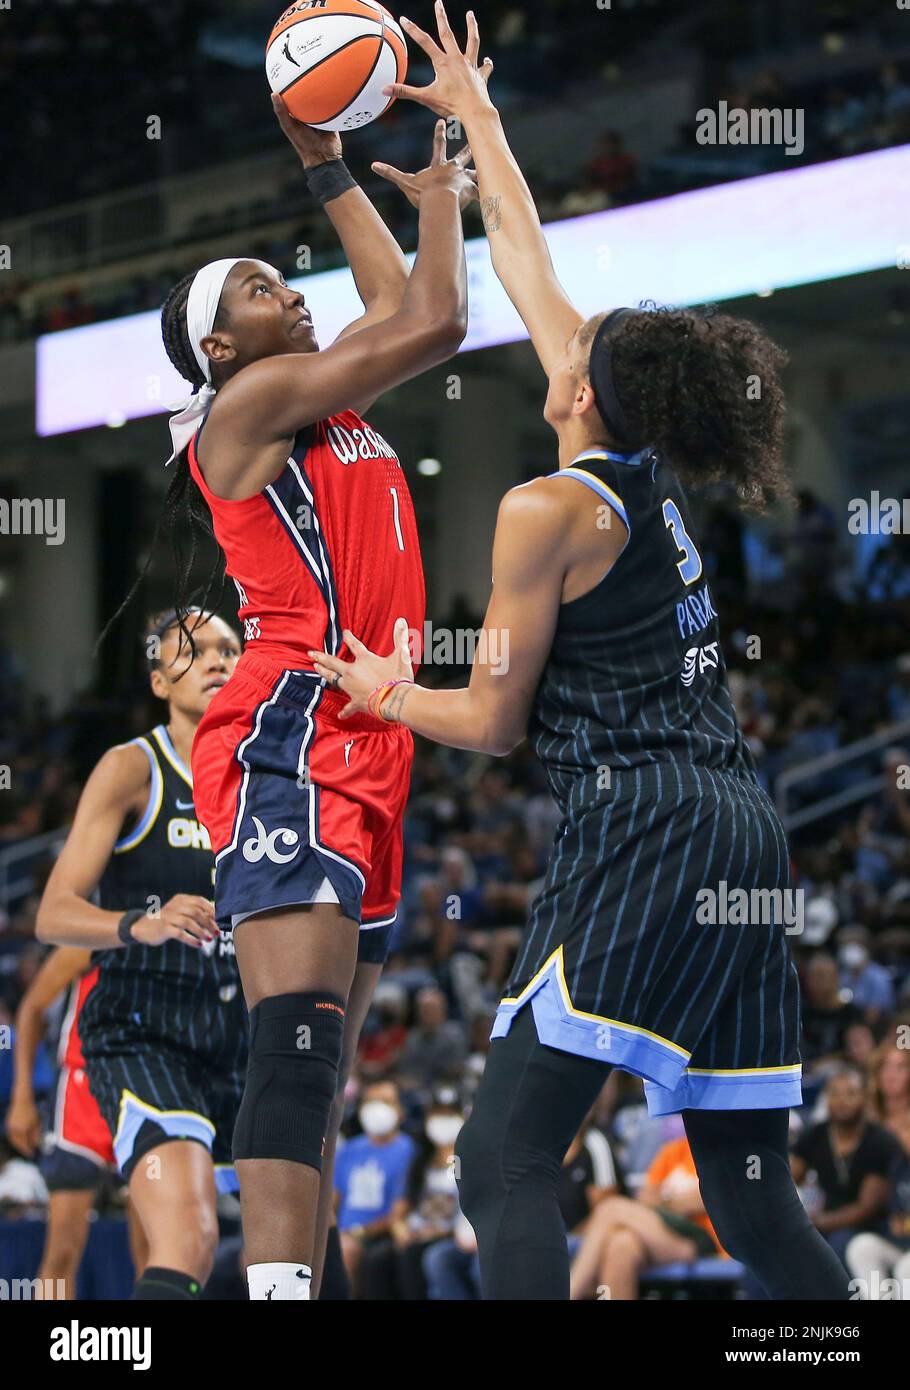 CHICAGO, IL - AUGUST 05: Chicago Sky forward Candace Parker (3) in action  during a WNBA game between the Washington Mystics and the Chicago Sky on  August 5, 2022, at Wintrust Arena